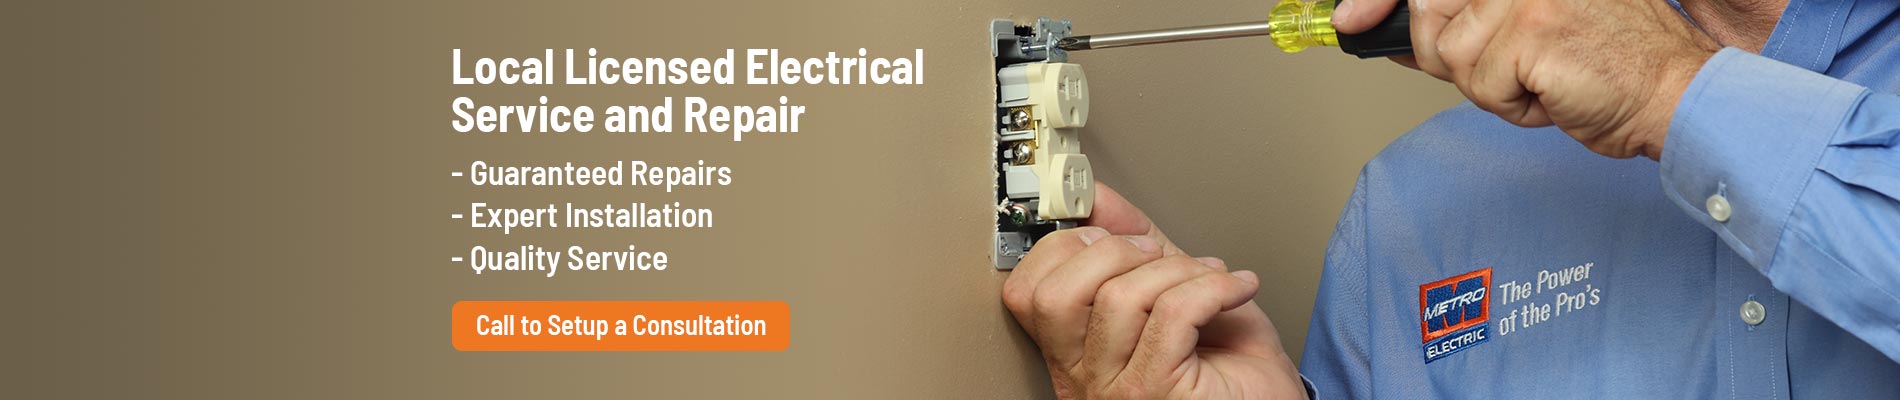 Local Licensed Electrical Service & Repair. Guaranteed Repairs. Expert Installation. Quality Service.